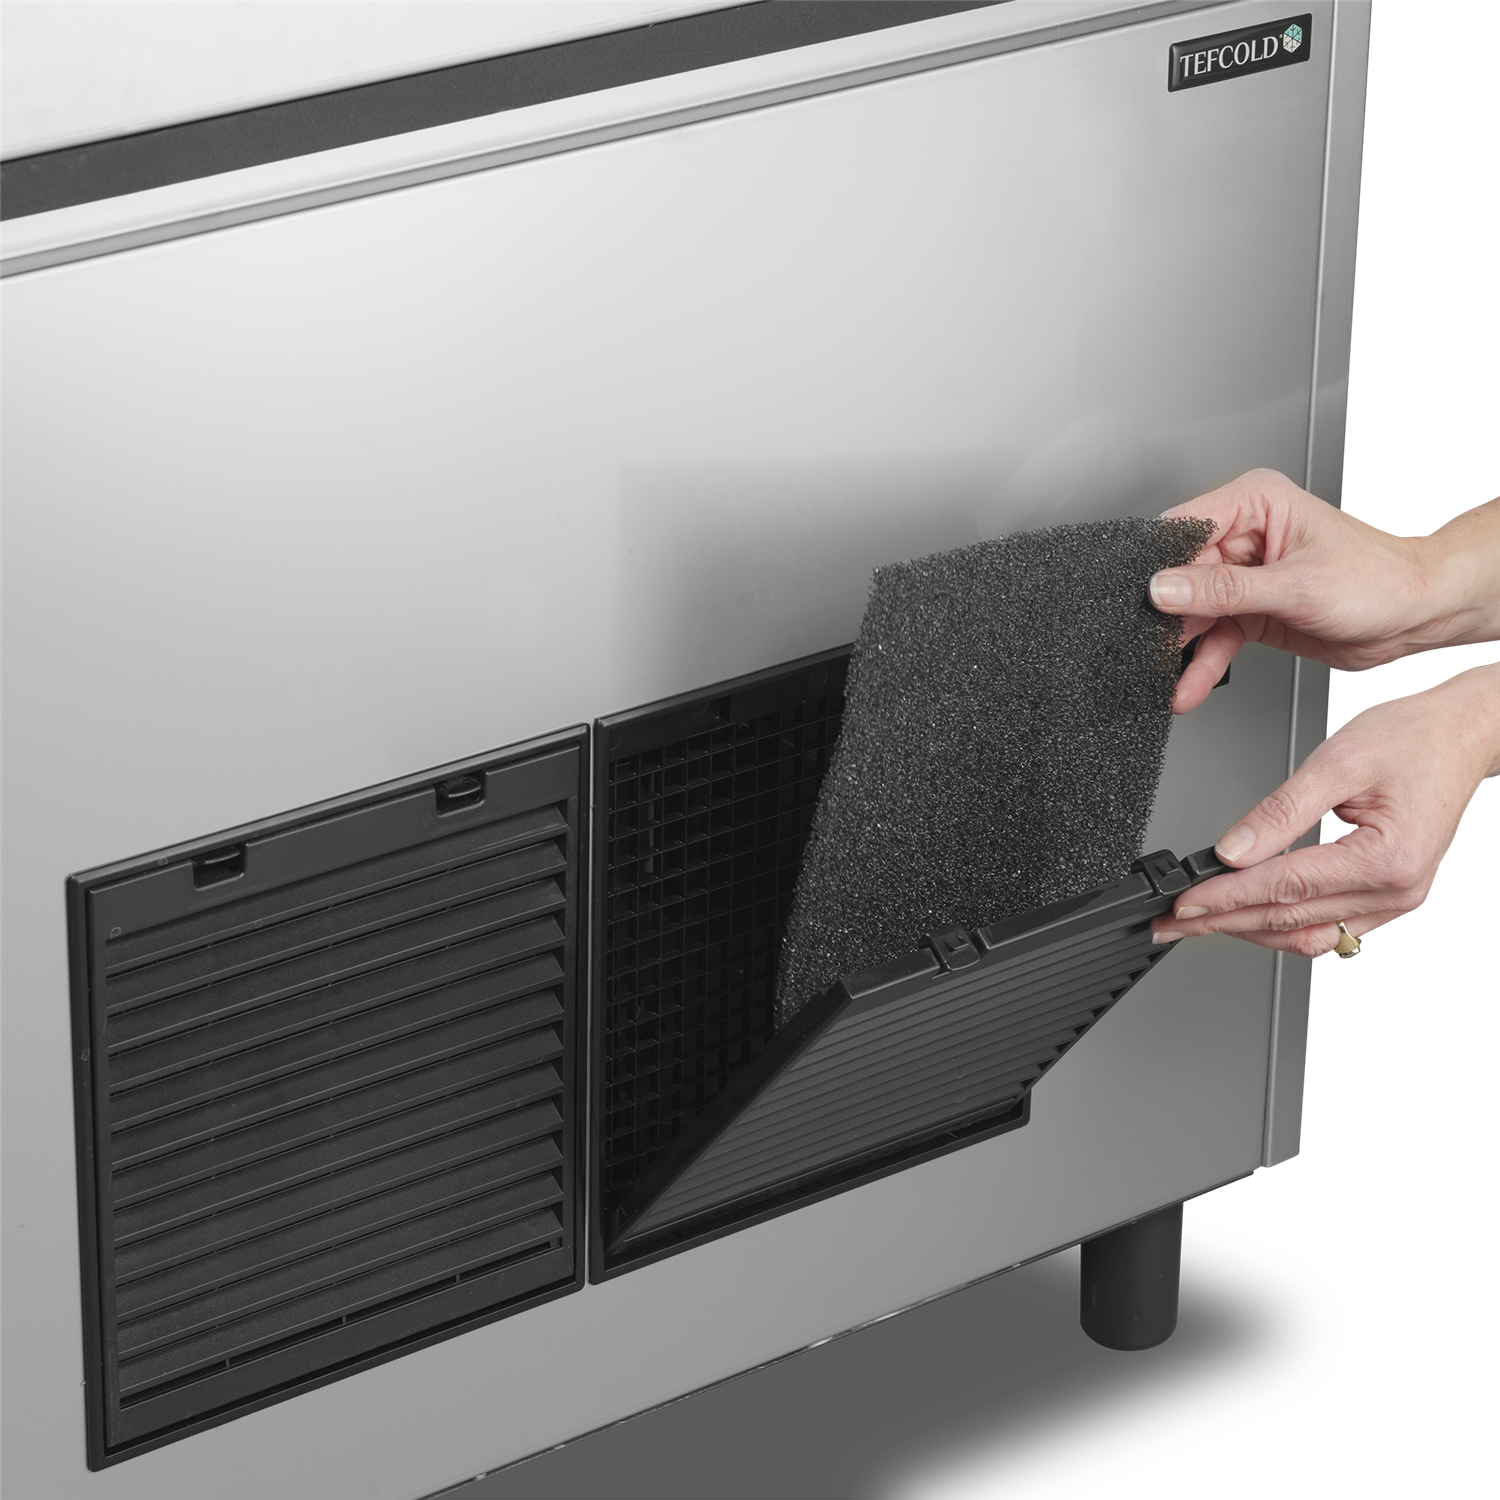 Simpe to clean condenser filters on TC85